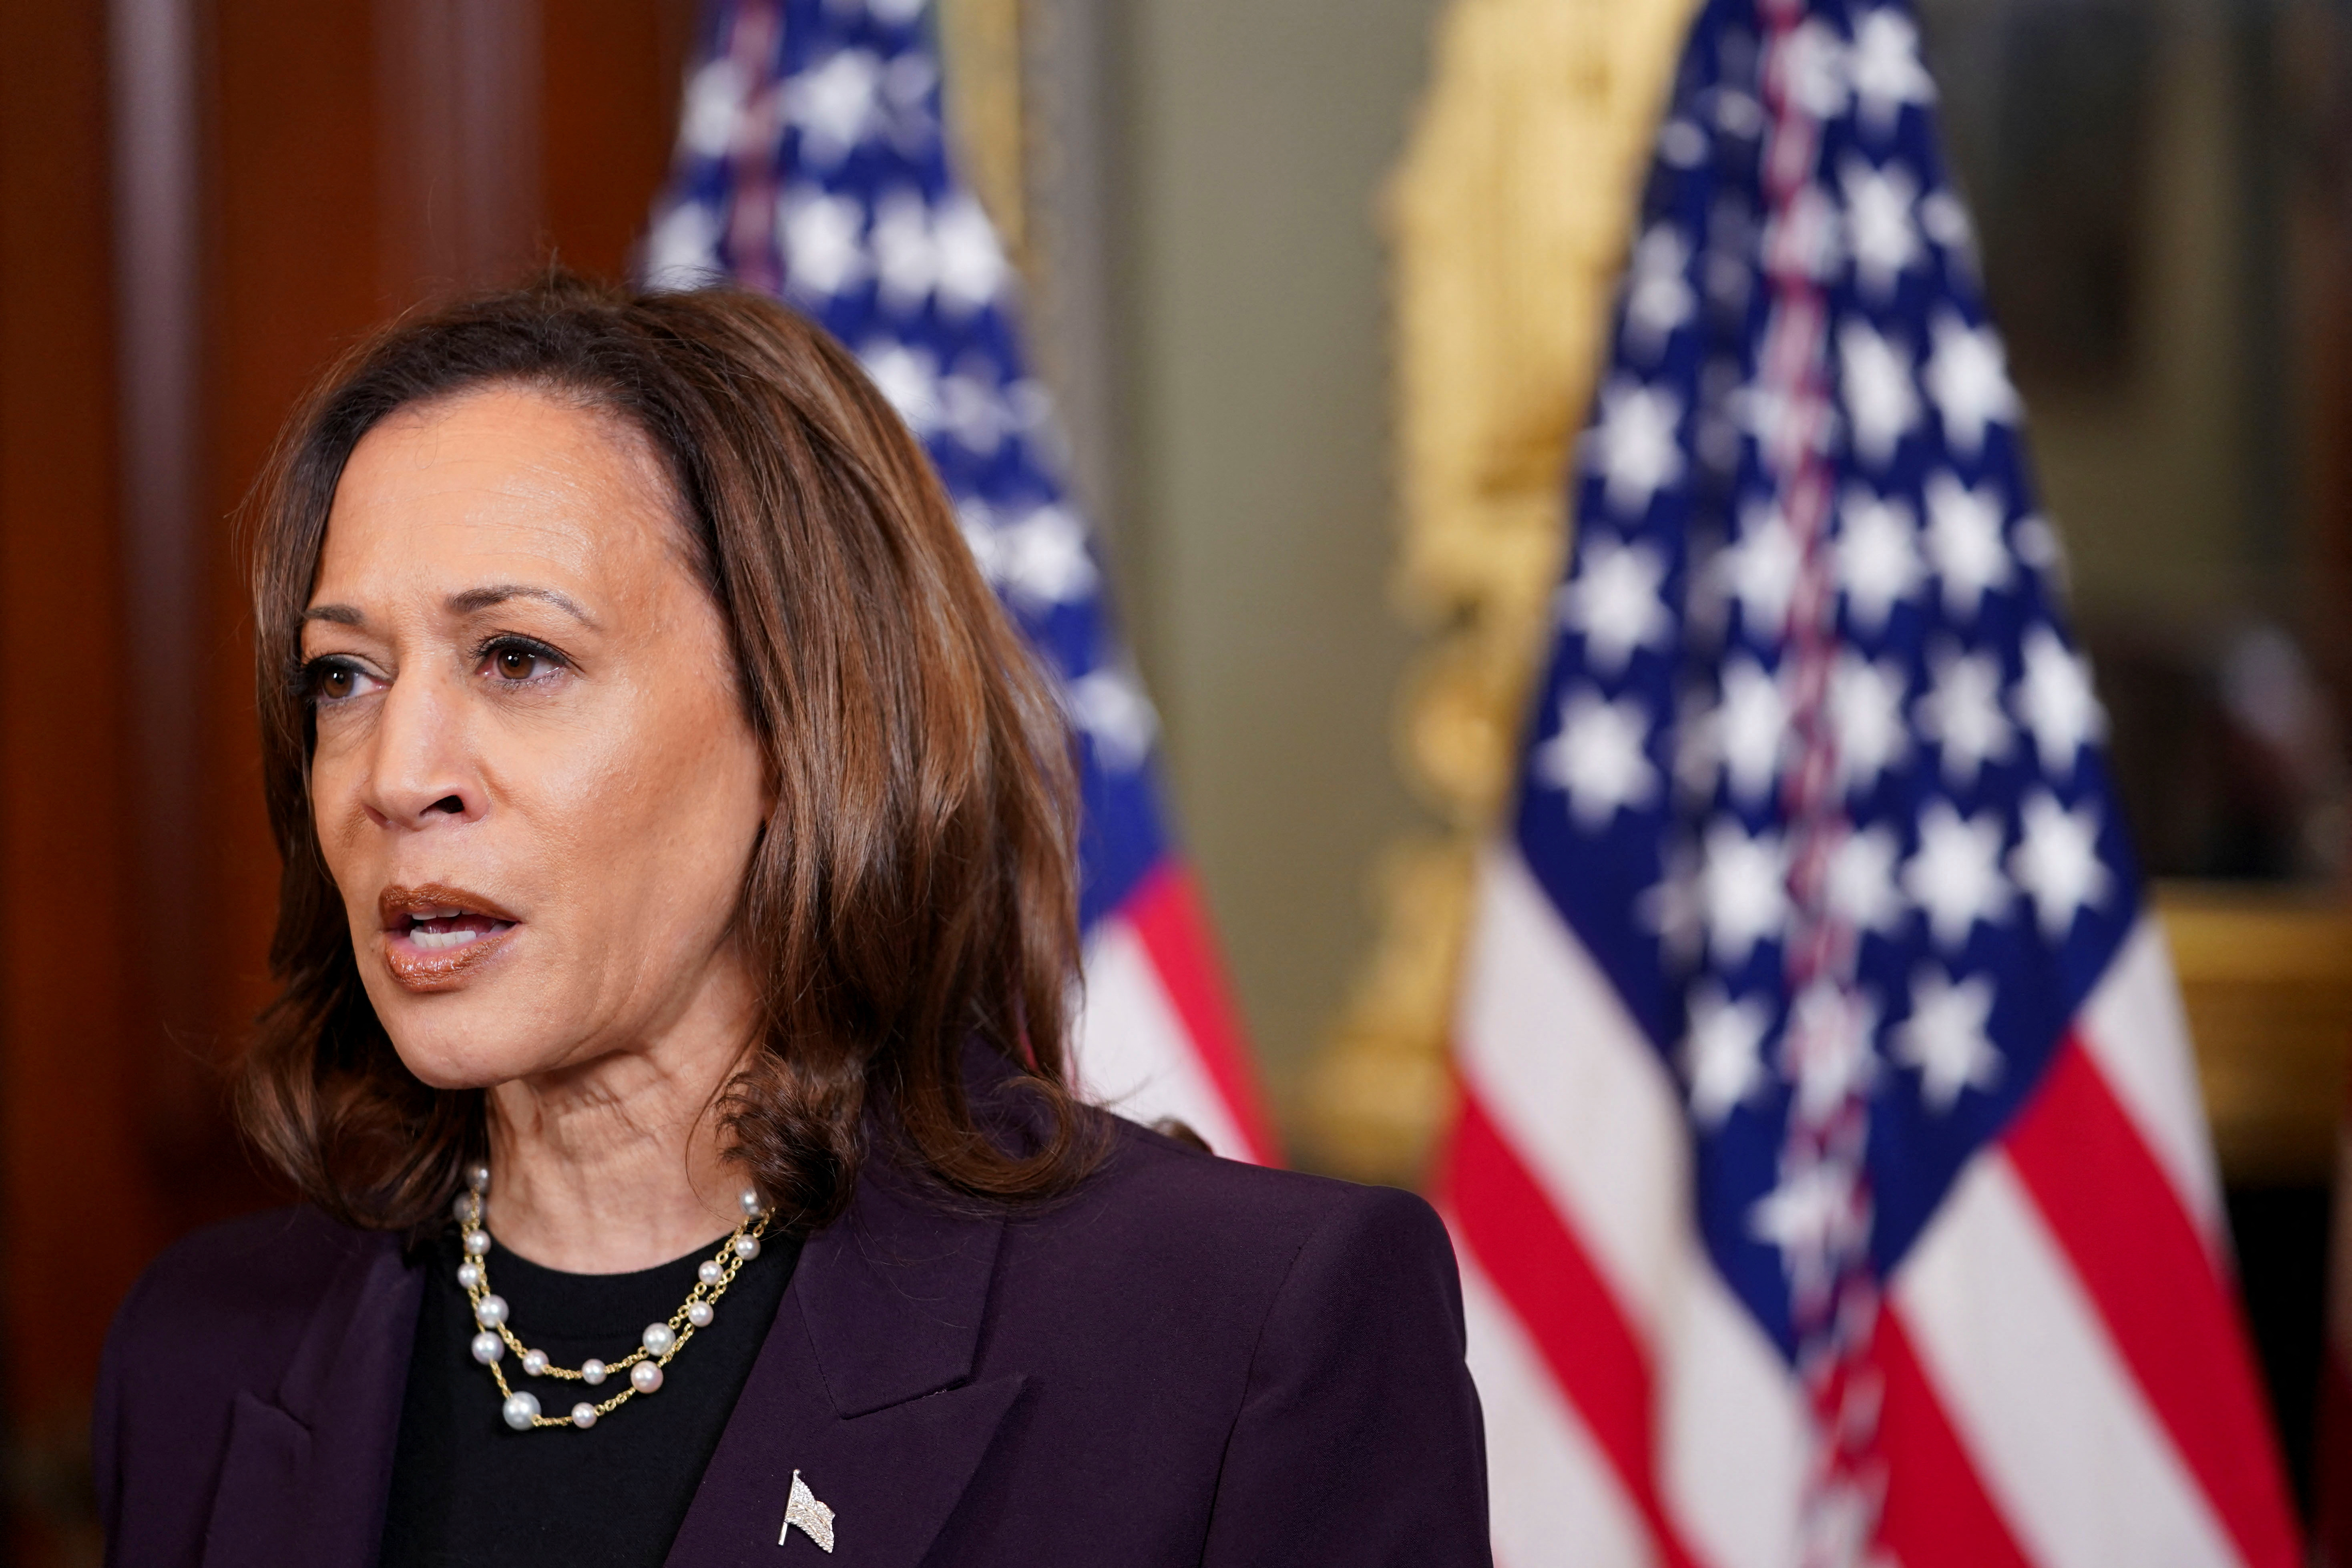 What misinformation has been shared about Kamala Harris?